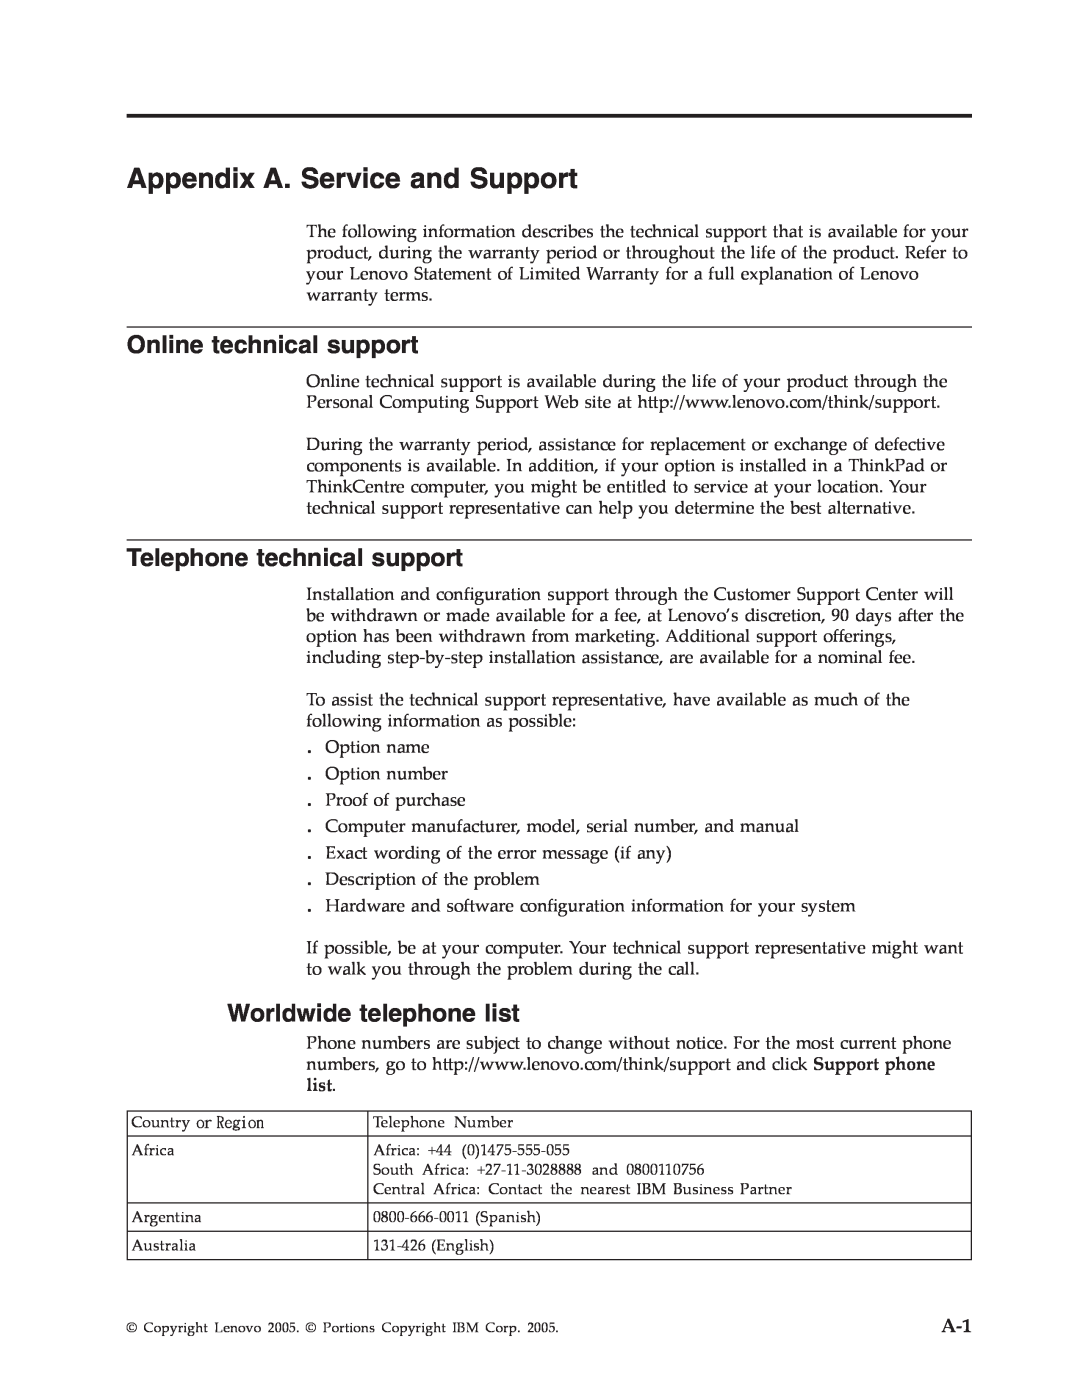 Lenovo L151 manual Appendix A. Service and Support, Online technical support, Telephone technical support 